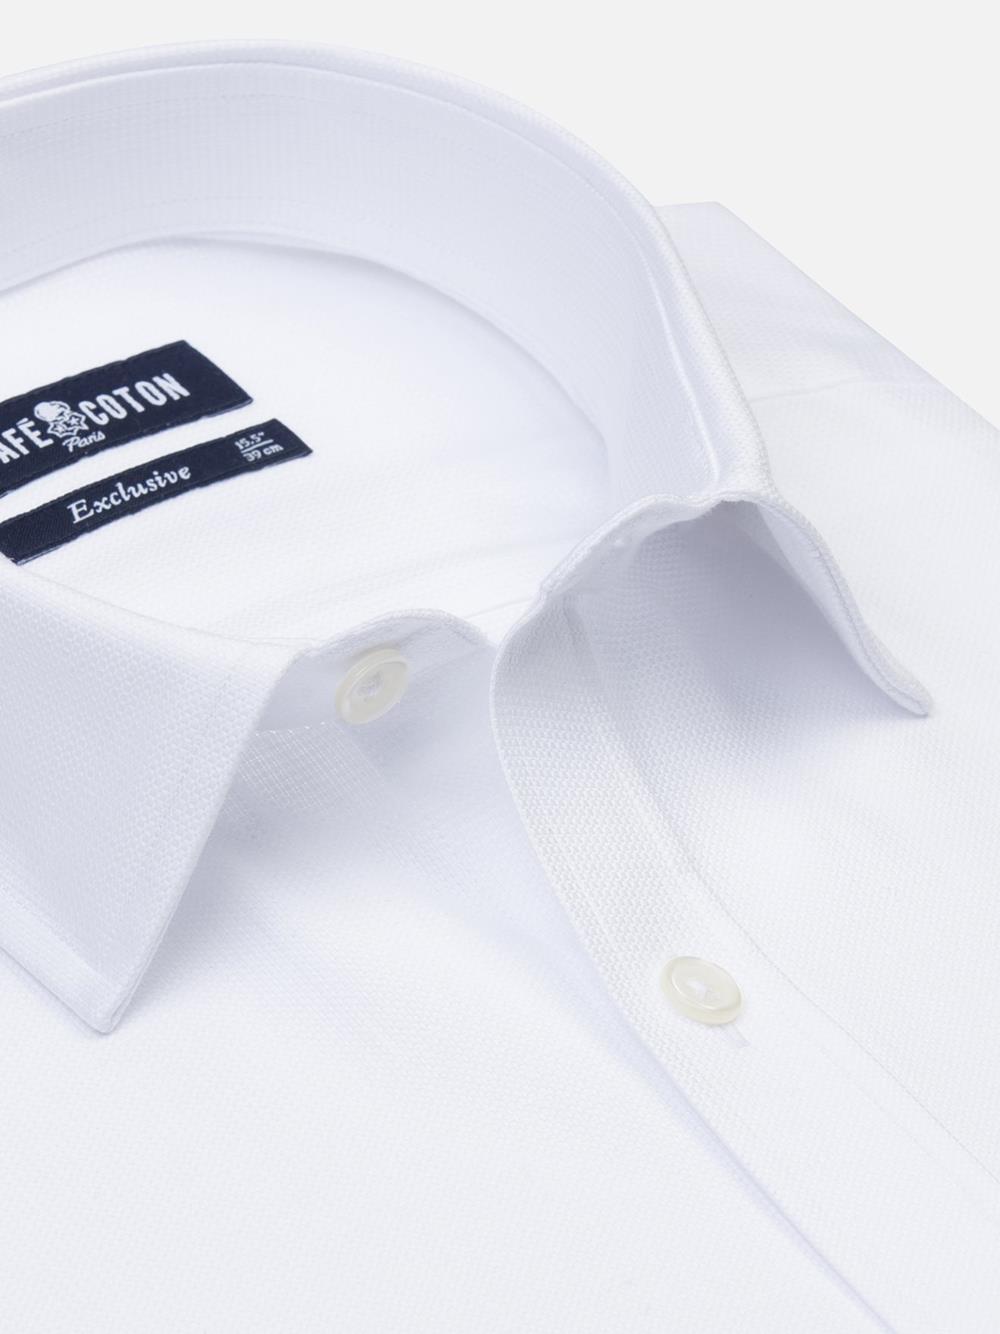 White textured slim fit shirt  - Small Collar